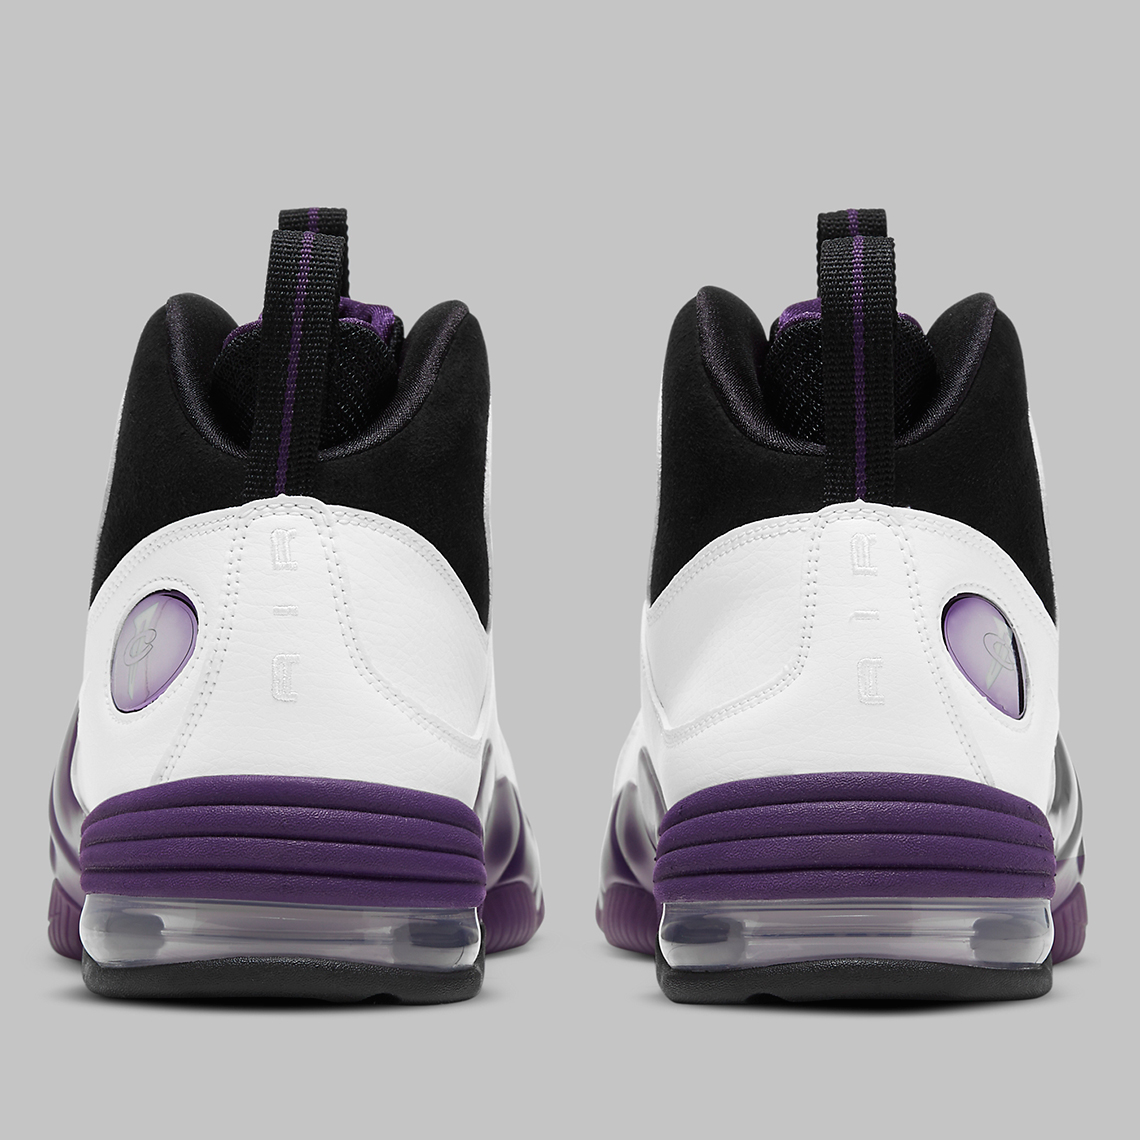 Nike Air Penny 3 Eggplant CT2809-500 Release Date | SneakerNews.com